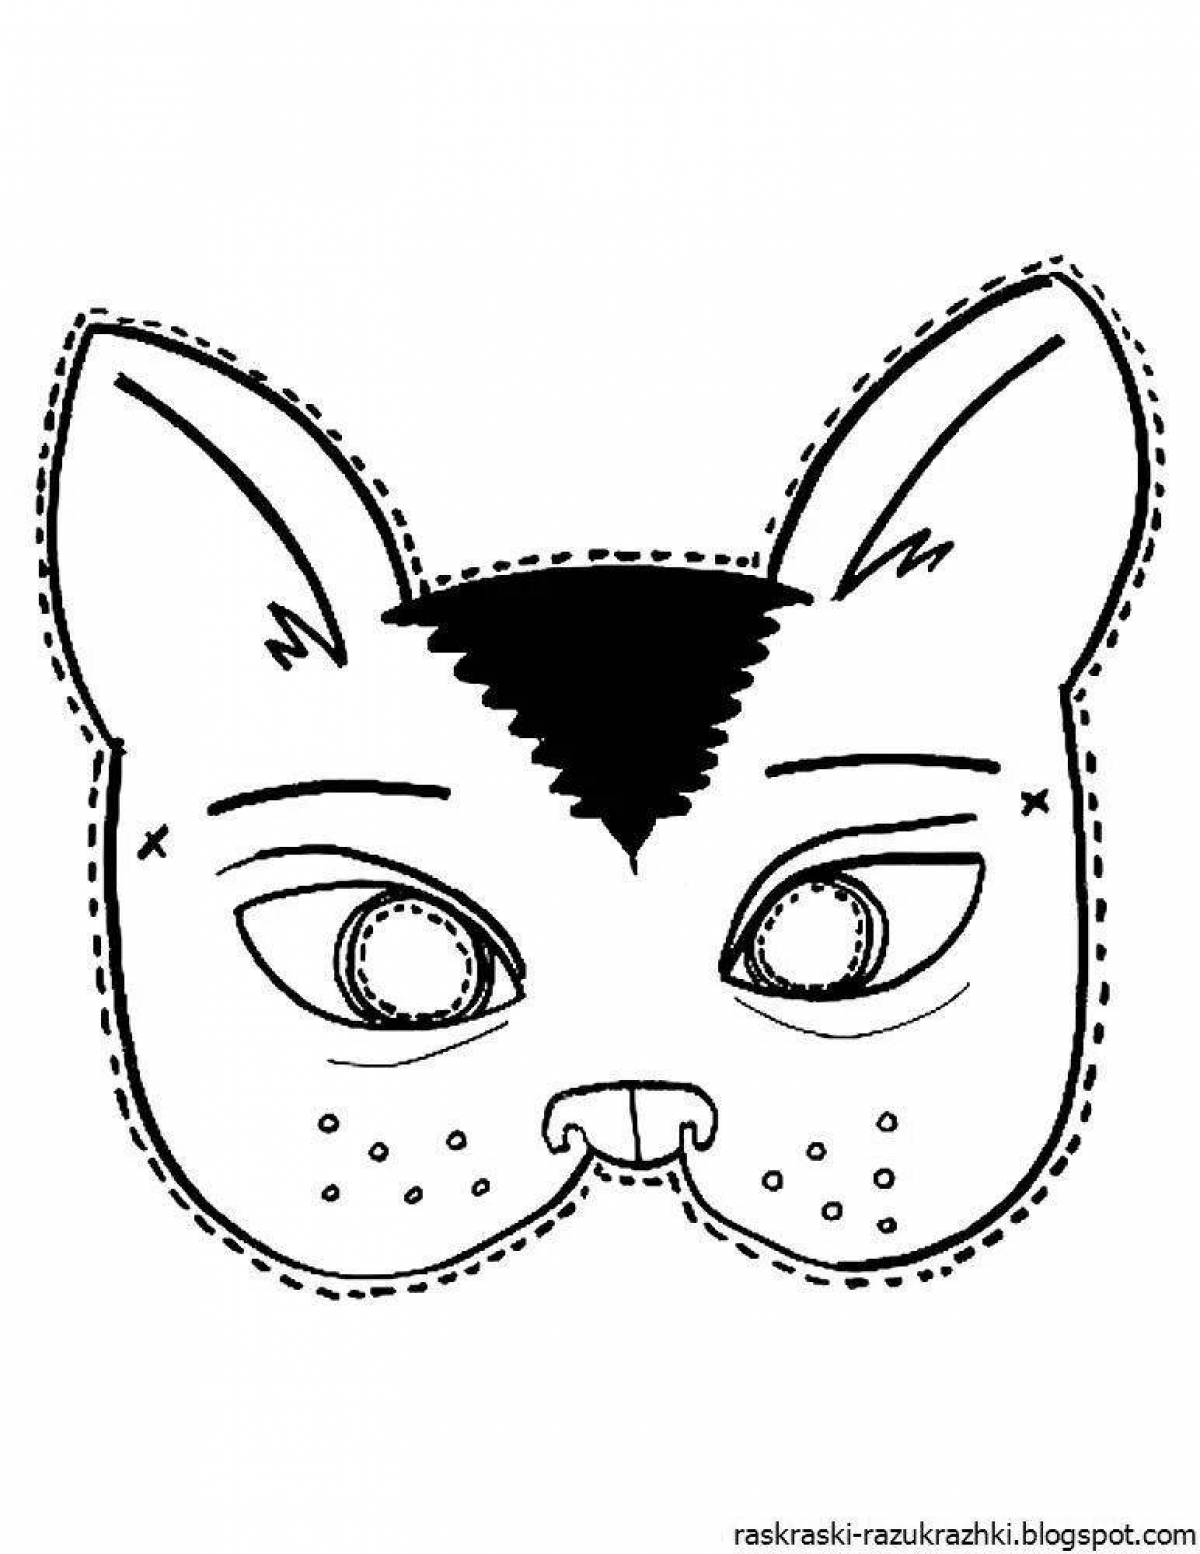 Energy mask coloring page